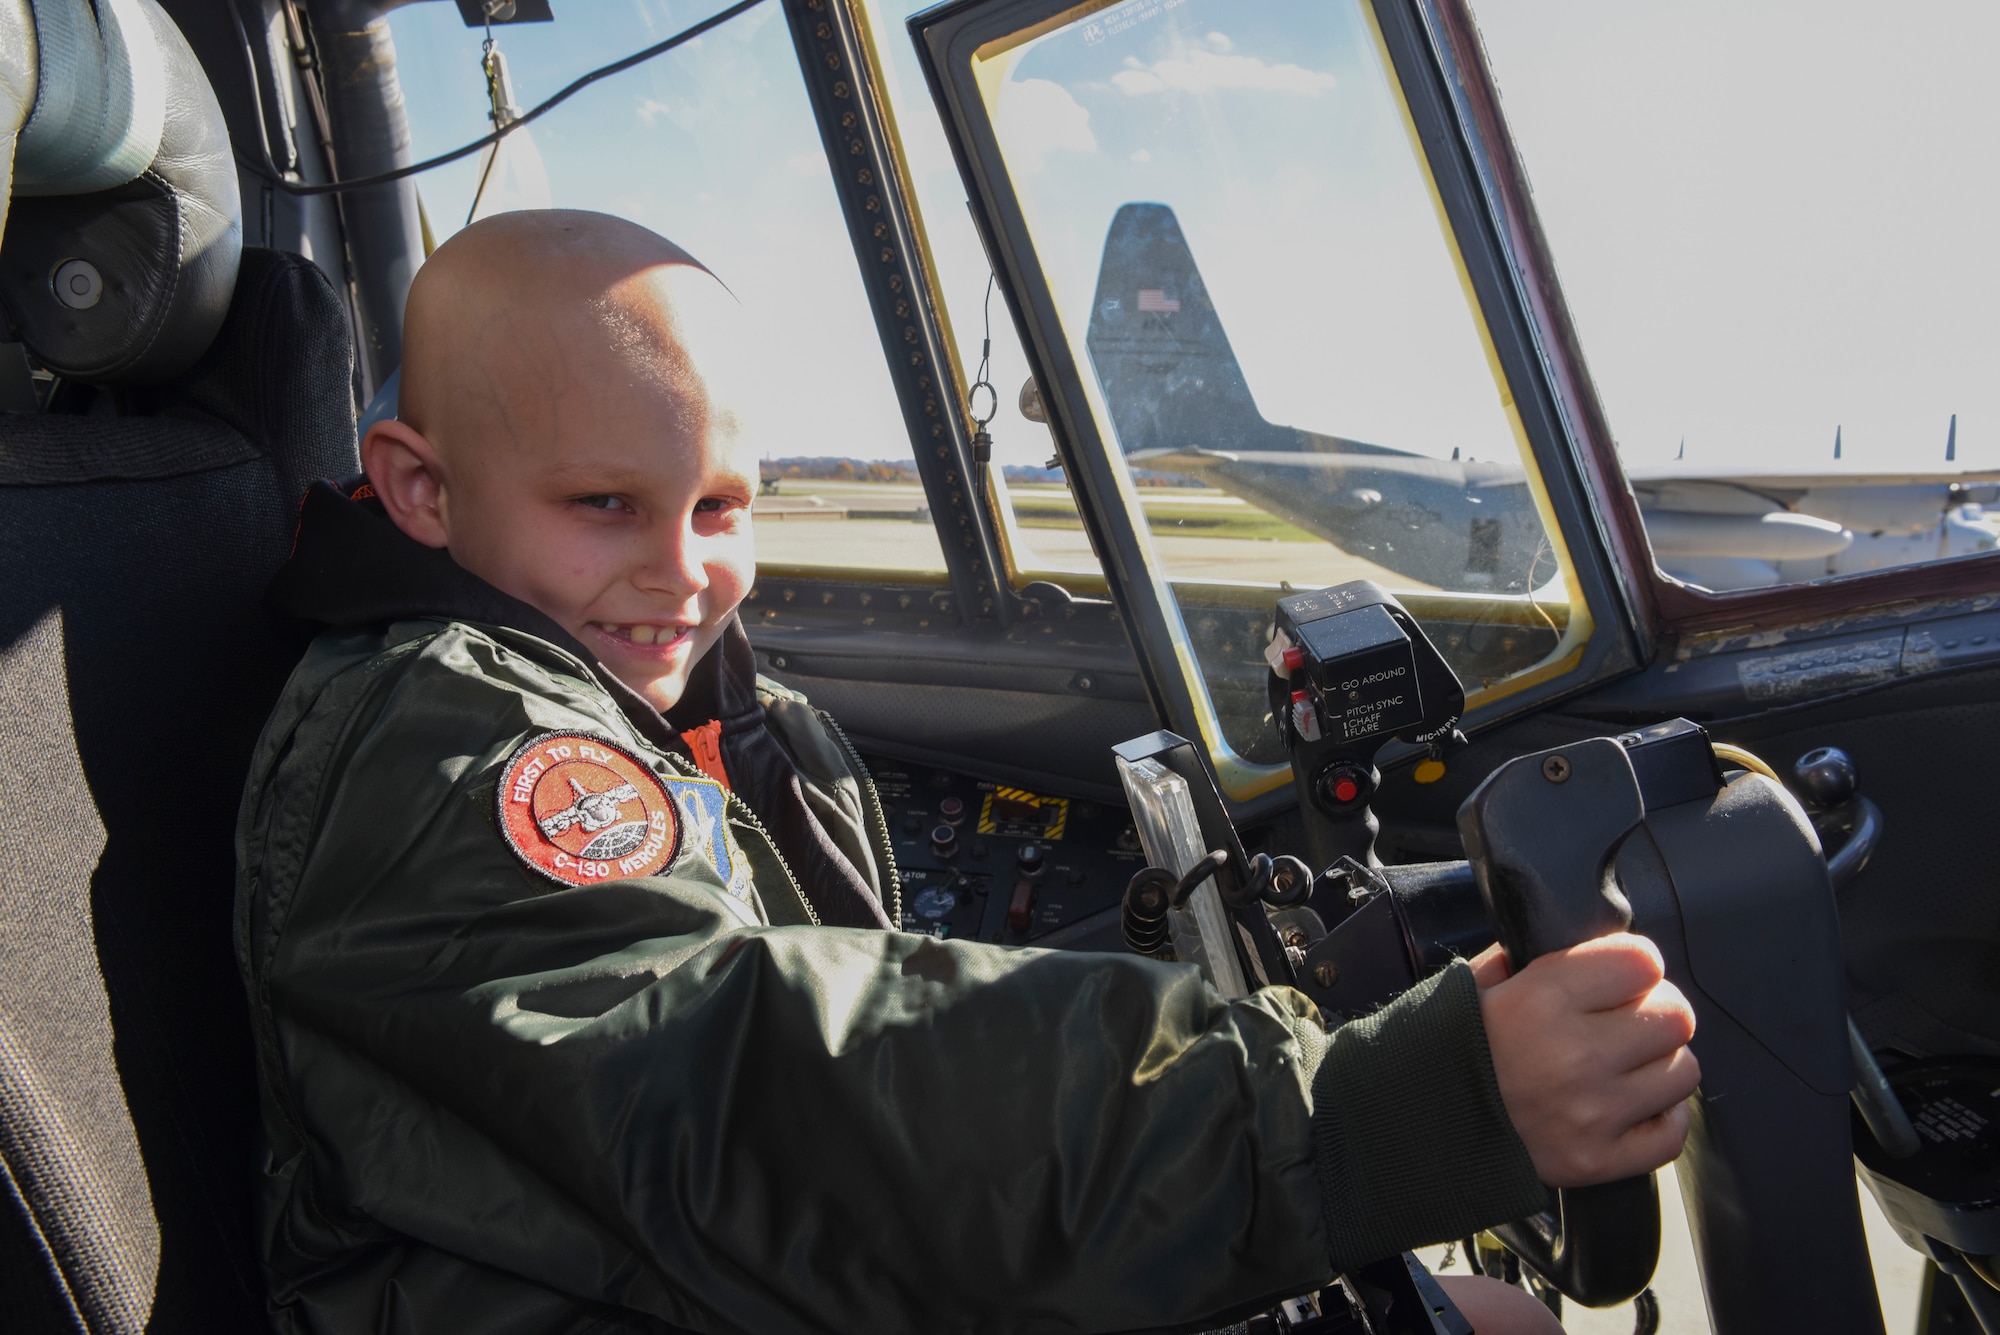 Drew Palmer, an eight-year old battling bone cancer, holds the control wheel of a C-130 Hercules at the Pittsburgh International Airport Air Reserve Station, Pa., Nov. 4, 2015. Palmer was honored as a “Pilot for a Day” and made an honorary Second Lieutenant for the day as he was able to tour the base and see what Airmen of the 911th Airlift Wing do on a daily basis. During his tour, he also visited the Navy Operational Support Center where he was made an honorary Lieutenant Commander. (U.S. Air Force photo by Staff Sgt. Joshua J. Seybert)